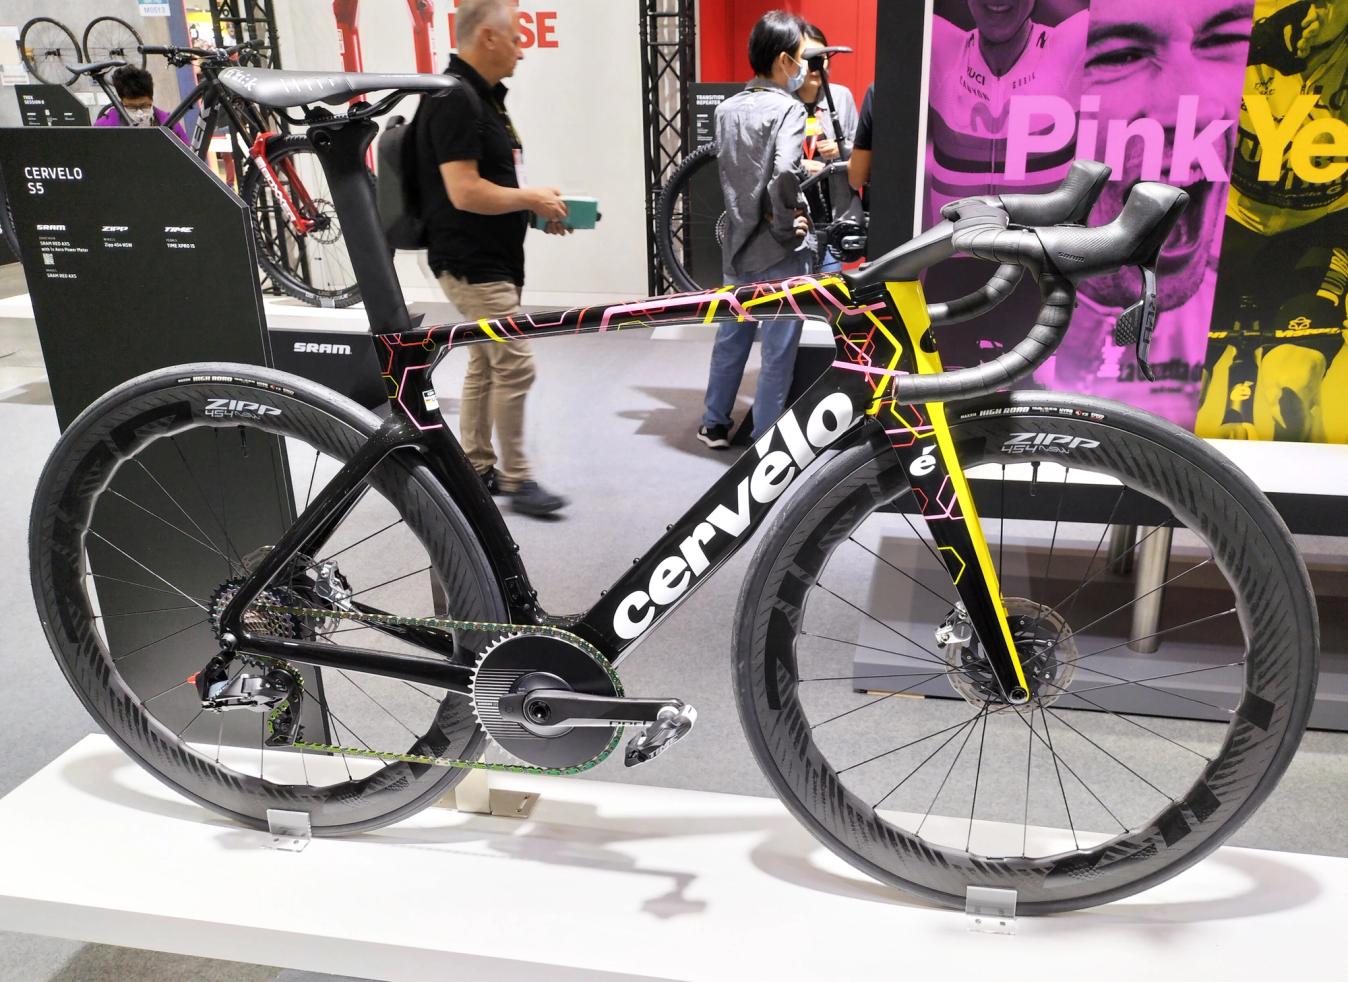 This Cervélo S5 has been an all-conquering WorldTour machine over recent seasons, piloted to lots of success by Visma-Lease a Bike and their riders, including Wout van Aert and Jonas Vingegaard